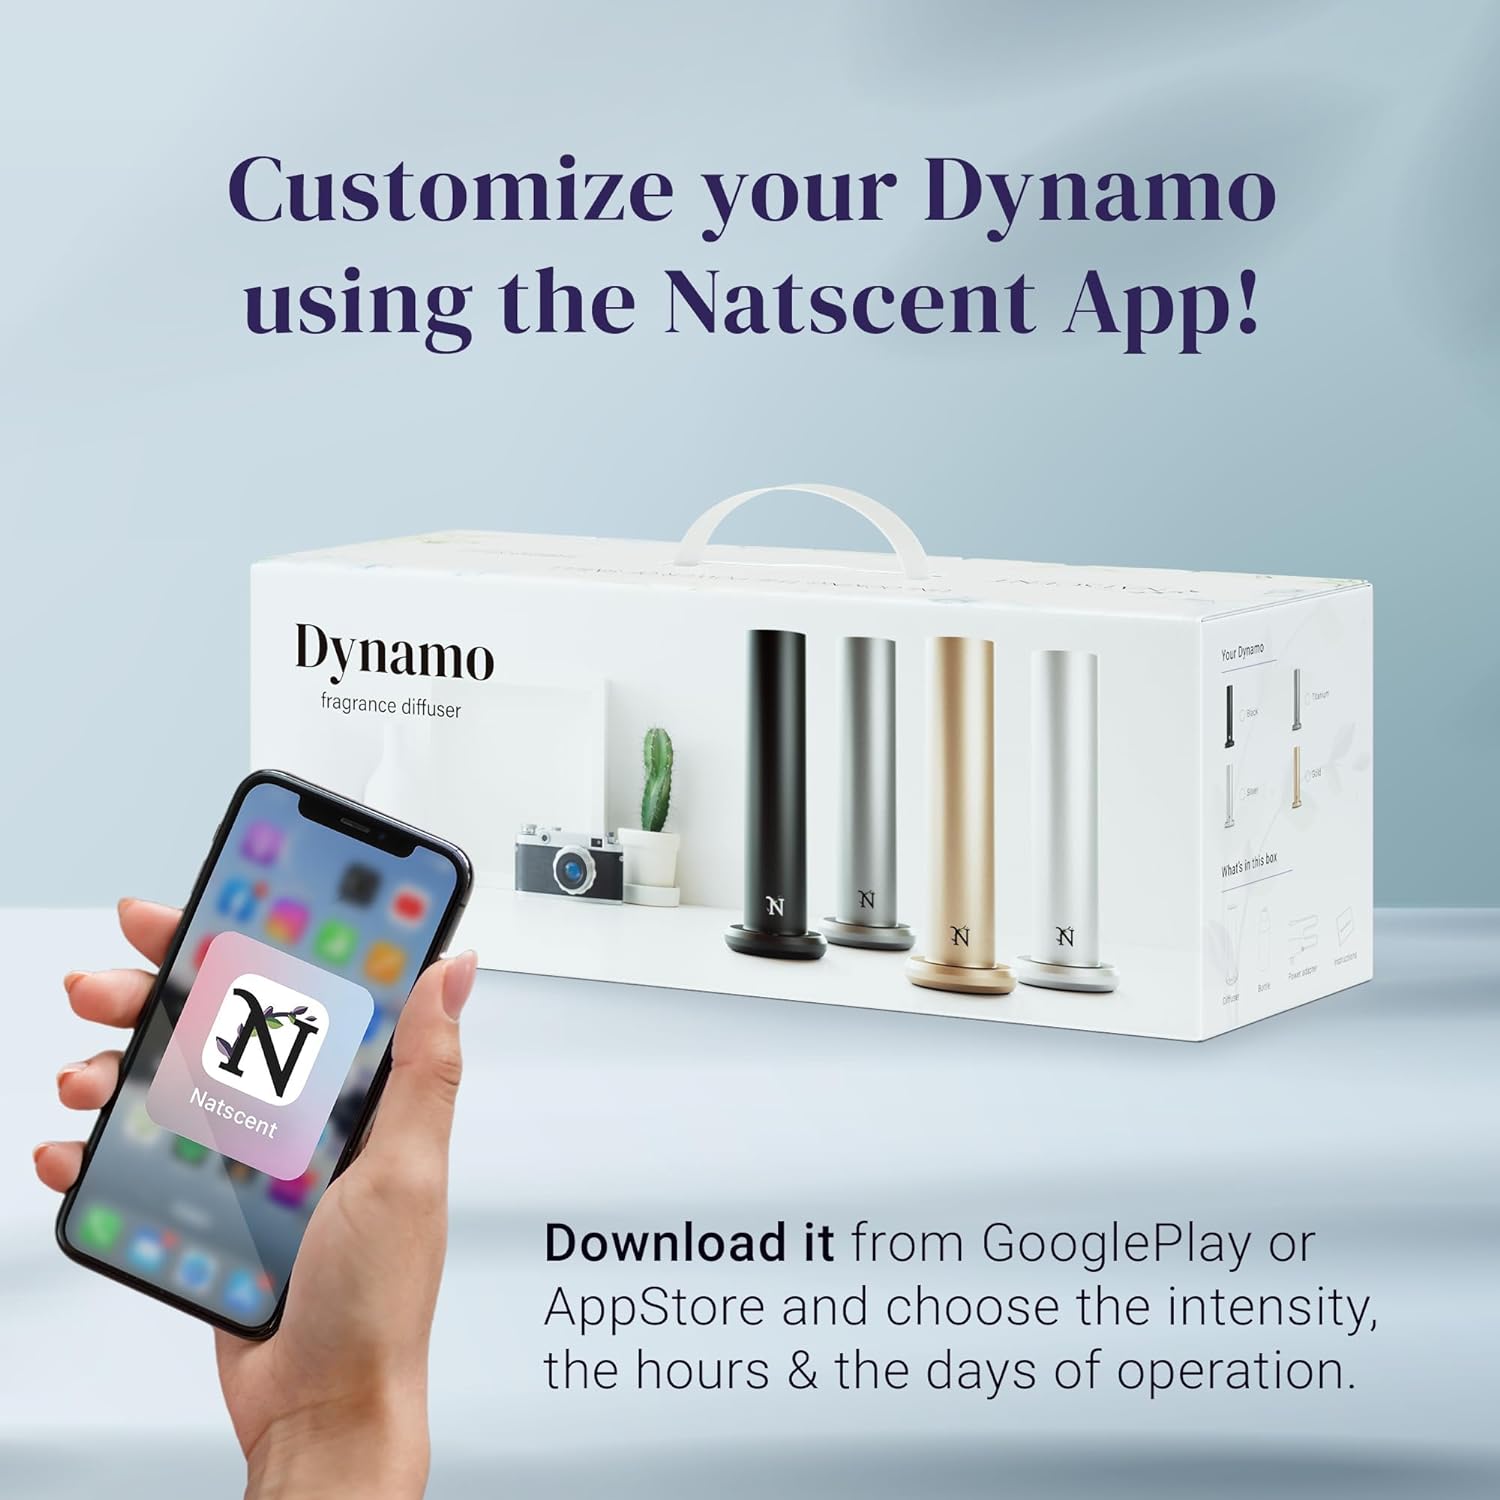 Natscent Updated Dynamo Essential Oil Diffusers, App or Manual Control, Plug & Play, Smart Diffusers for Essential Oils Large Room, Cold Air Diffusers for Home, Office ~1000 sq.ft – Titanium